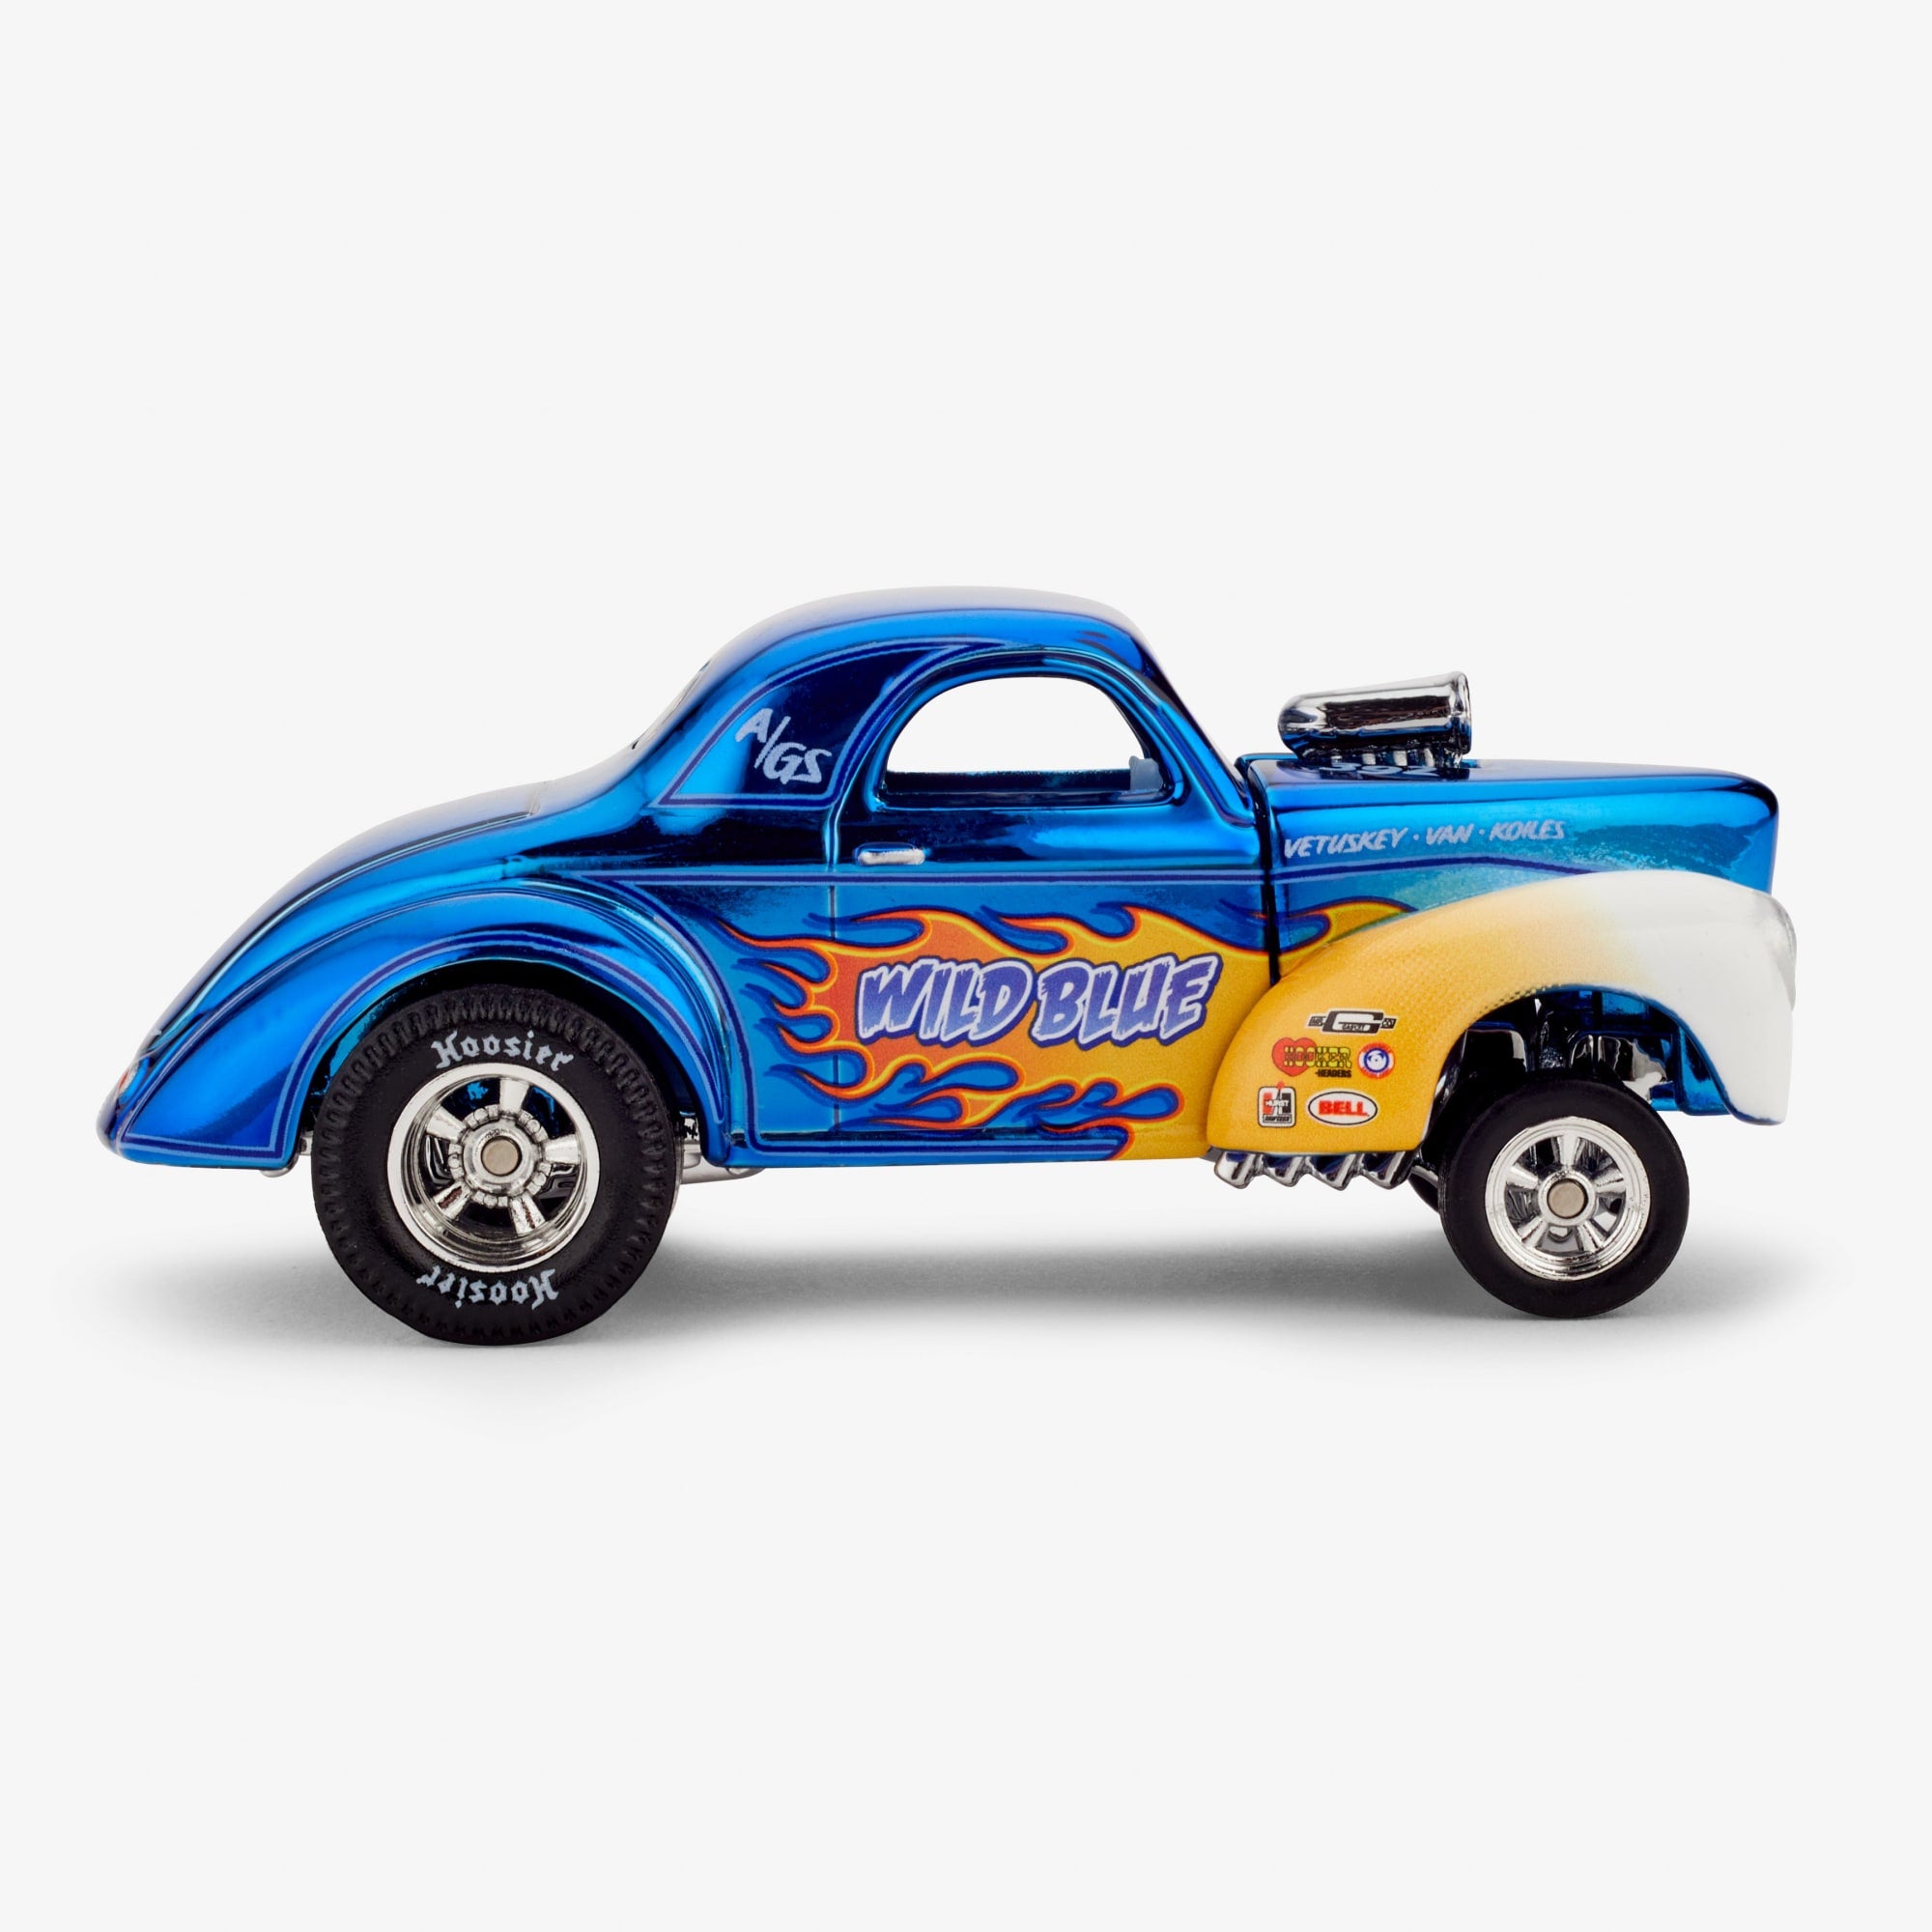 RLC sELECTIONs '41 Willys Gasser – Mattel Creations